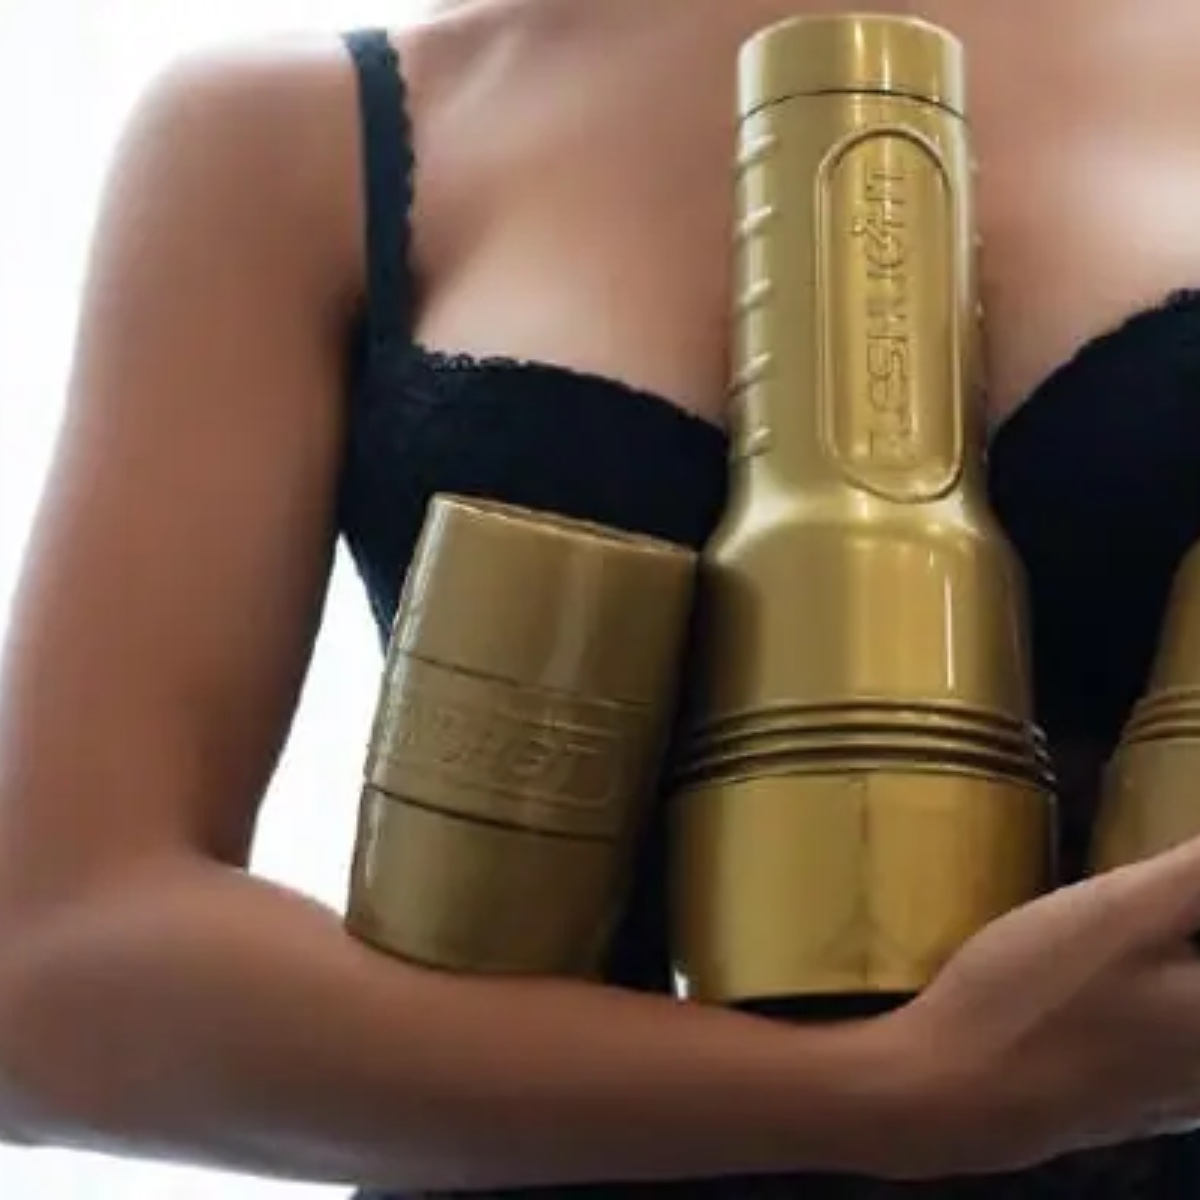 Top 10 Best Fleshlight Models: Features and Benefits